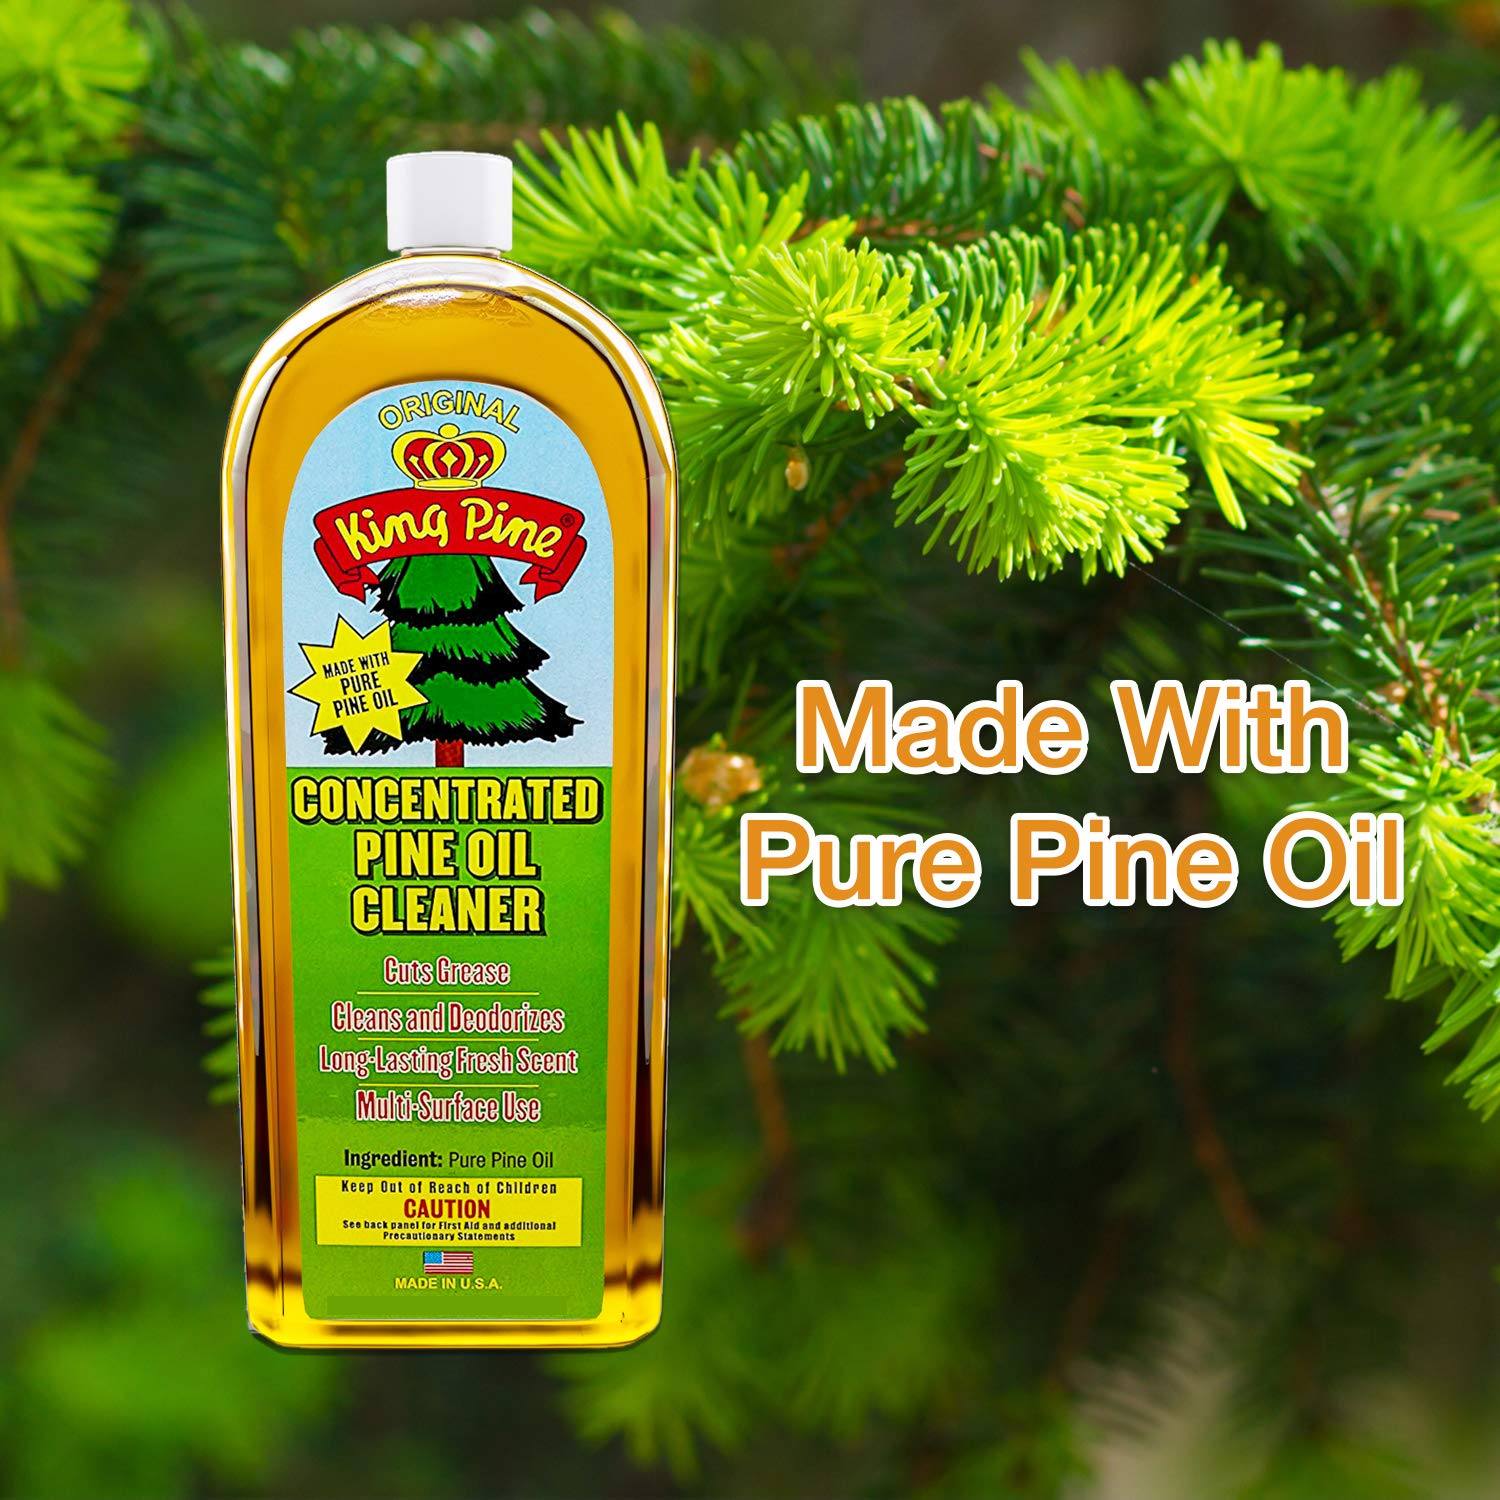 King Pine Concentrated Pine Multi-Surface Cleaner Industrial Strength, Gold (20 oz)